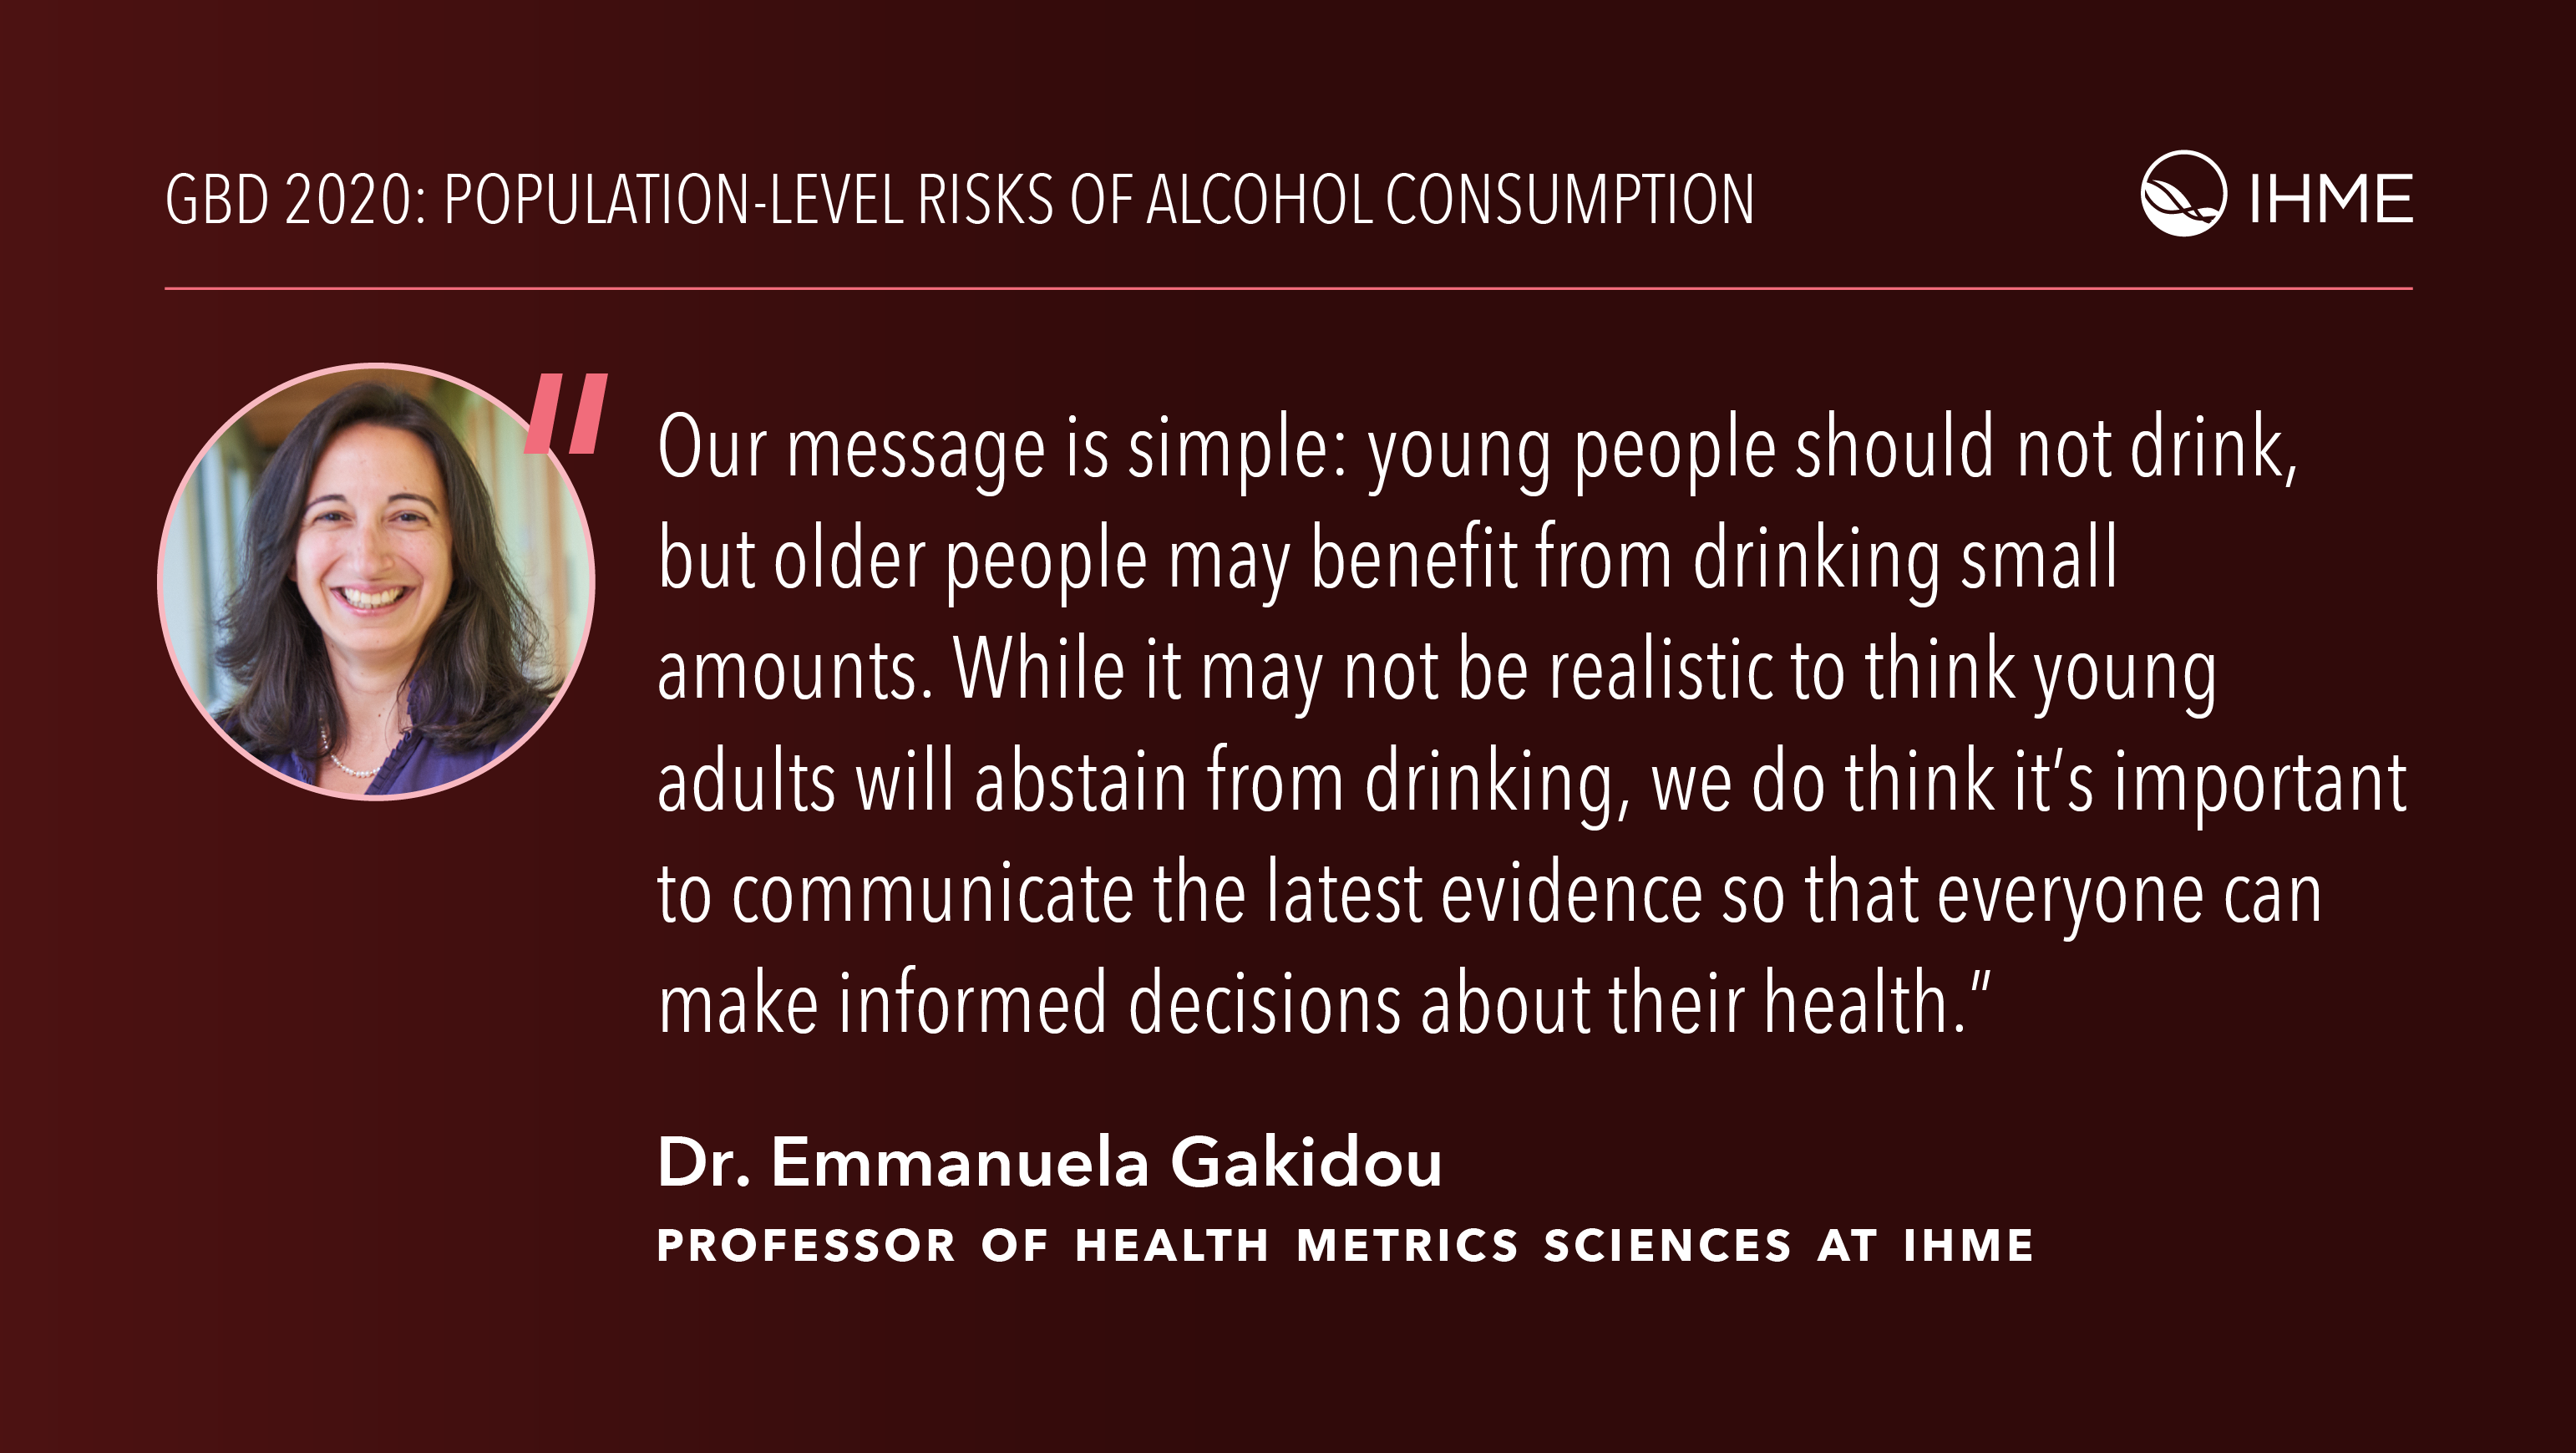  young people should not drink, but older people may benefit from drinking small amounts. While it may not be realistic to think young adults will abstain from drinking, we do think it’s important to communicate the latest evidence so that everyone can make informed decisions about their health.